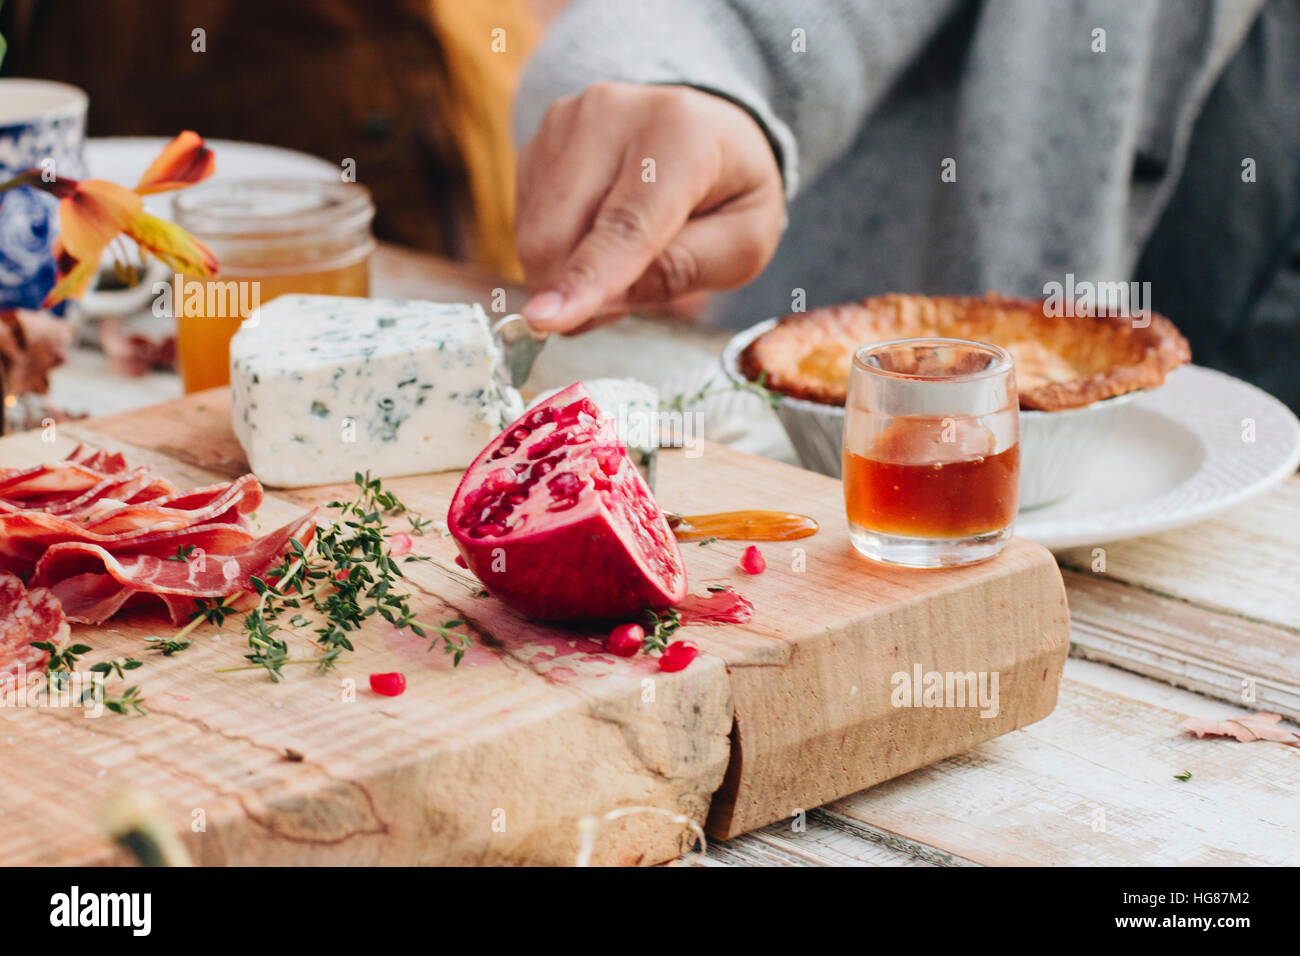 Cropped image of hand cutting cheese Stock Photo